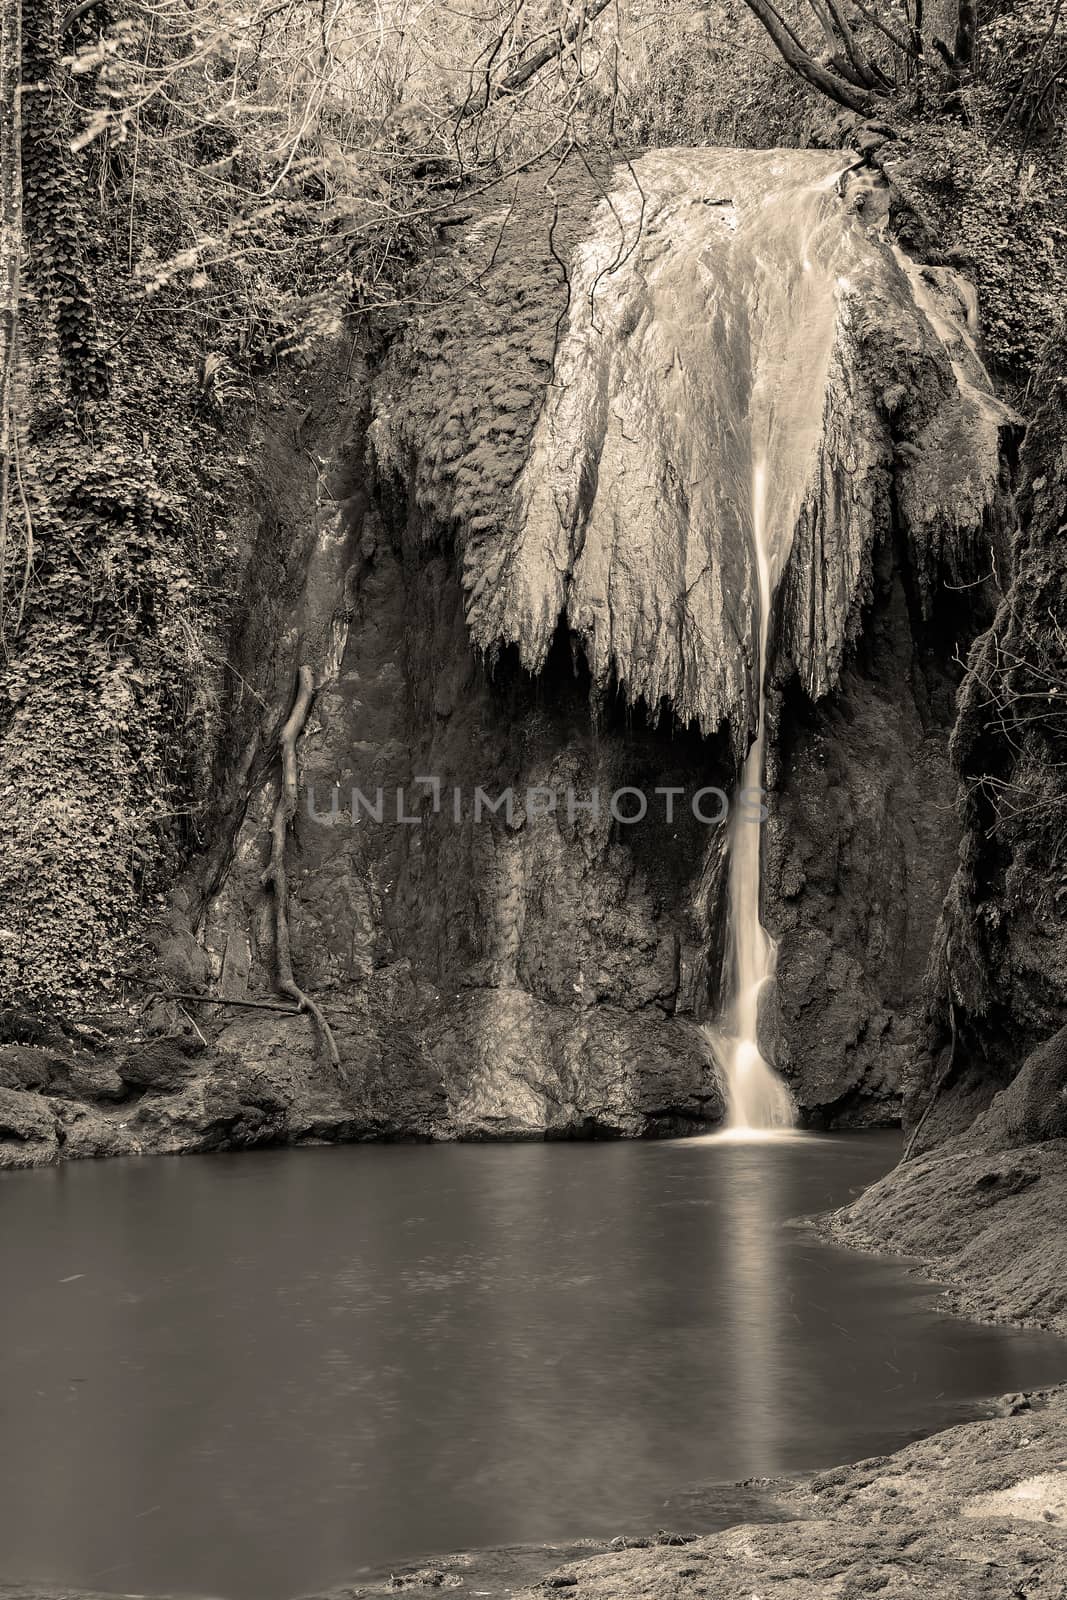 A small waterfall with pond below near Marmore waterfalls in black and white